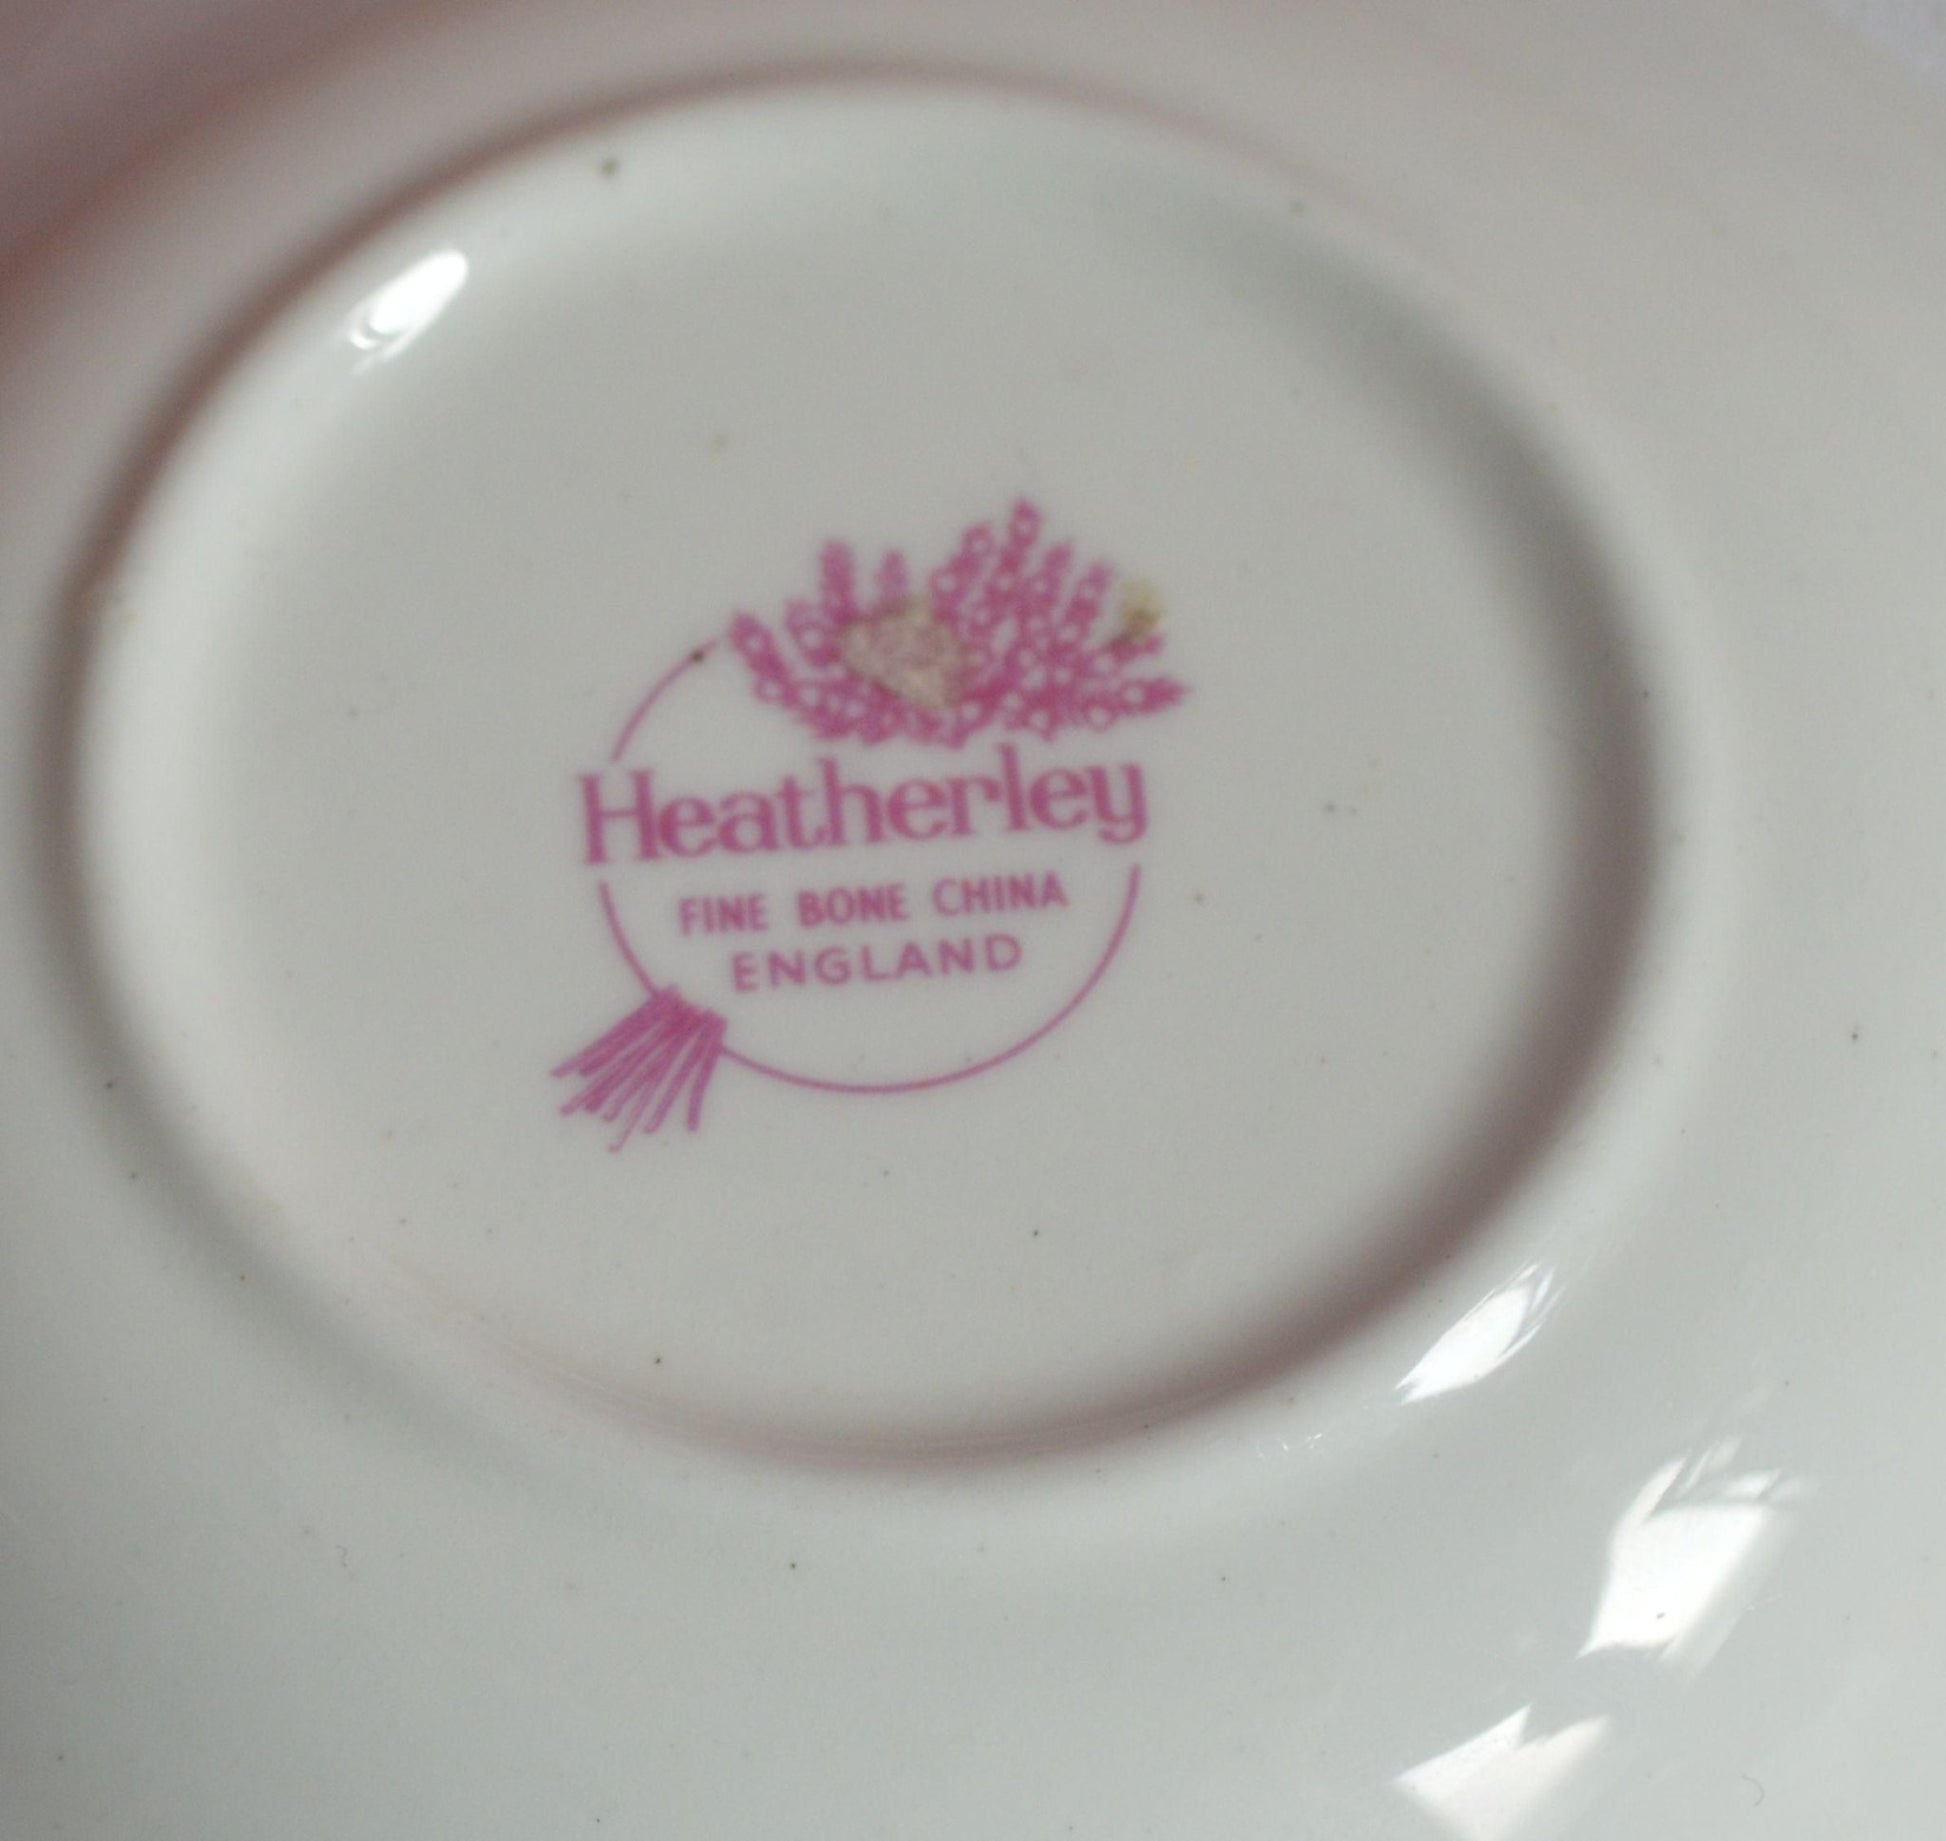 MINIATURE HEATHERLEY PLATE DEPICTING A PINK CARNATION(PREVIOUSLY OWNED)VERY GOOD CONDITION - TMD167207